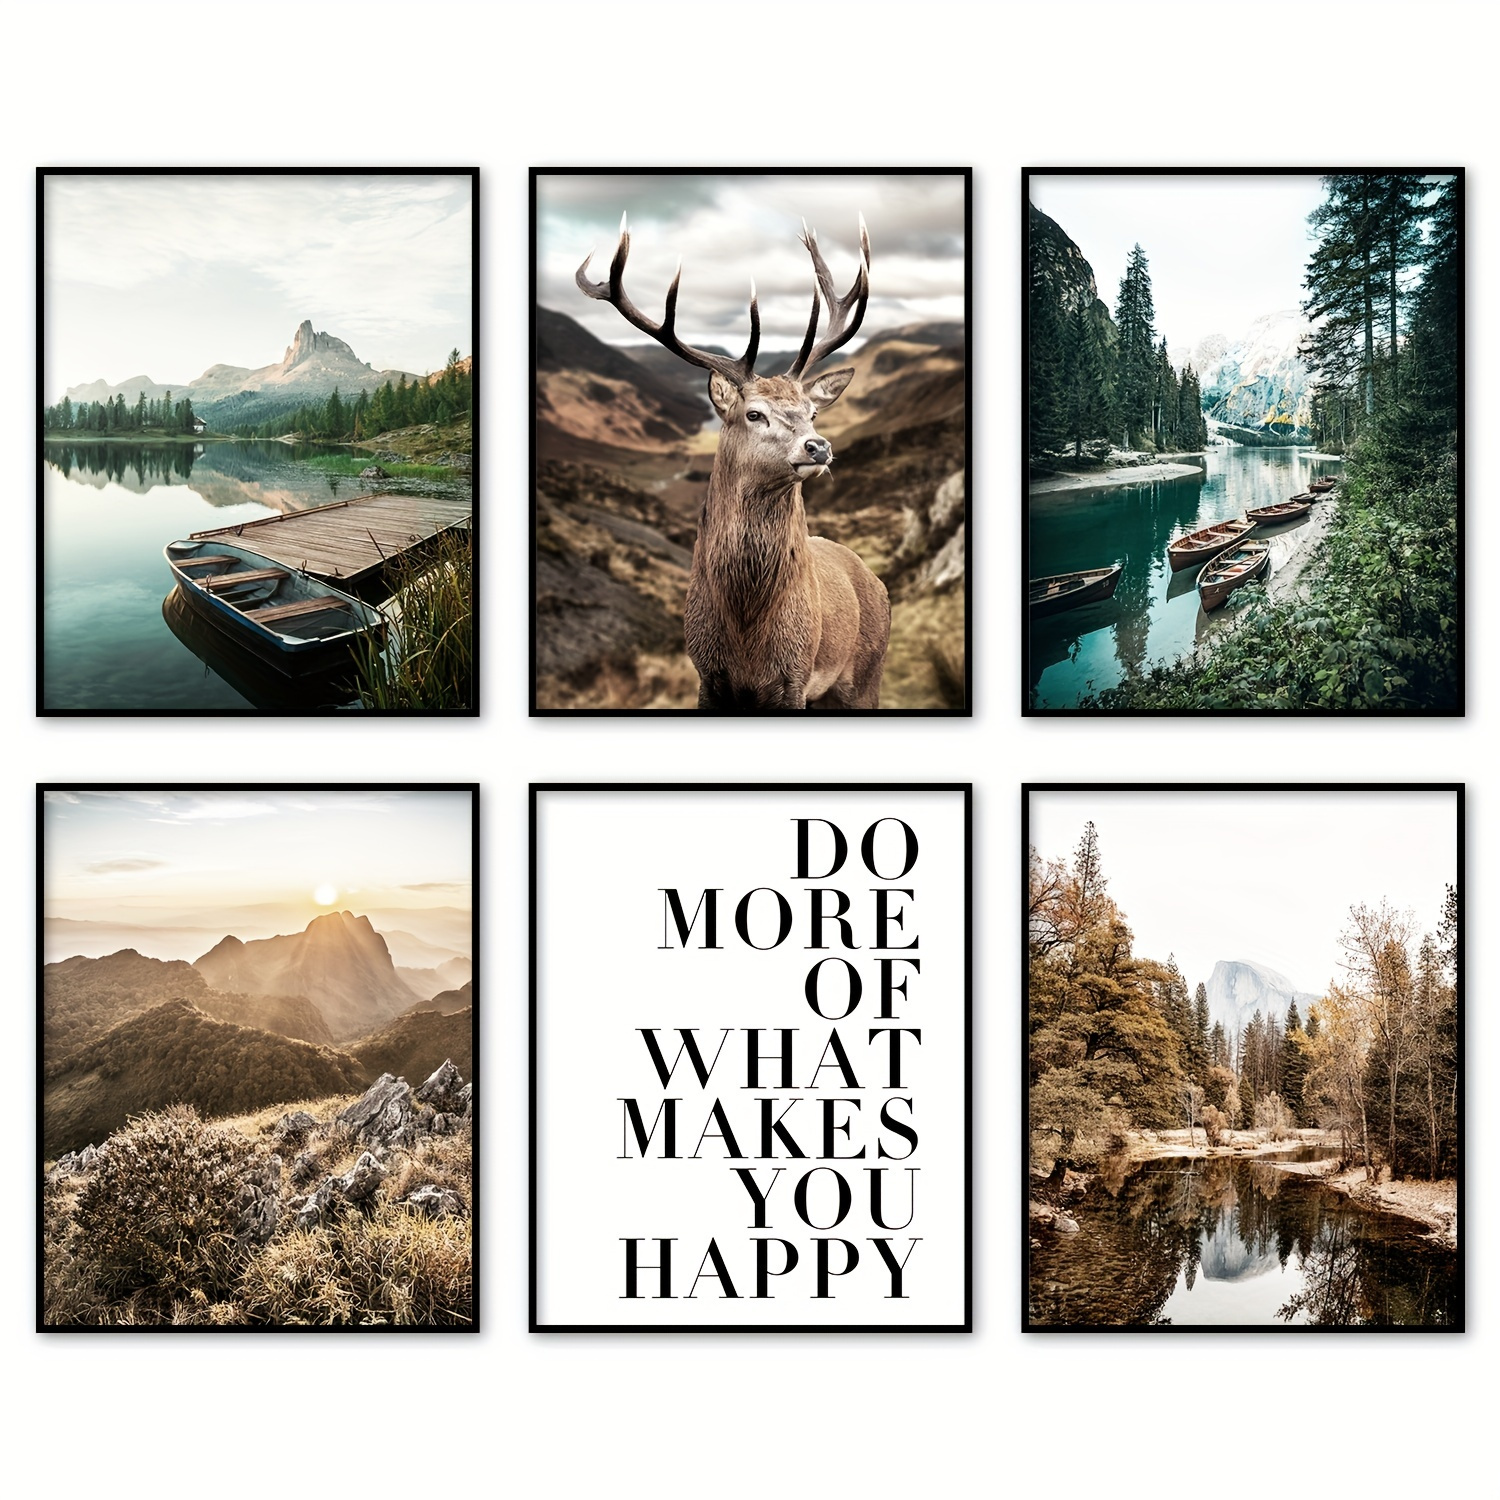 

6pcs/set, Lake Boat Pier Deer Canvas Wall Art Prints For Living Room And Bedroom Decor - 8x10inches Frameless